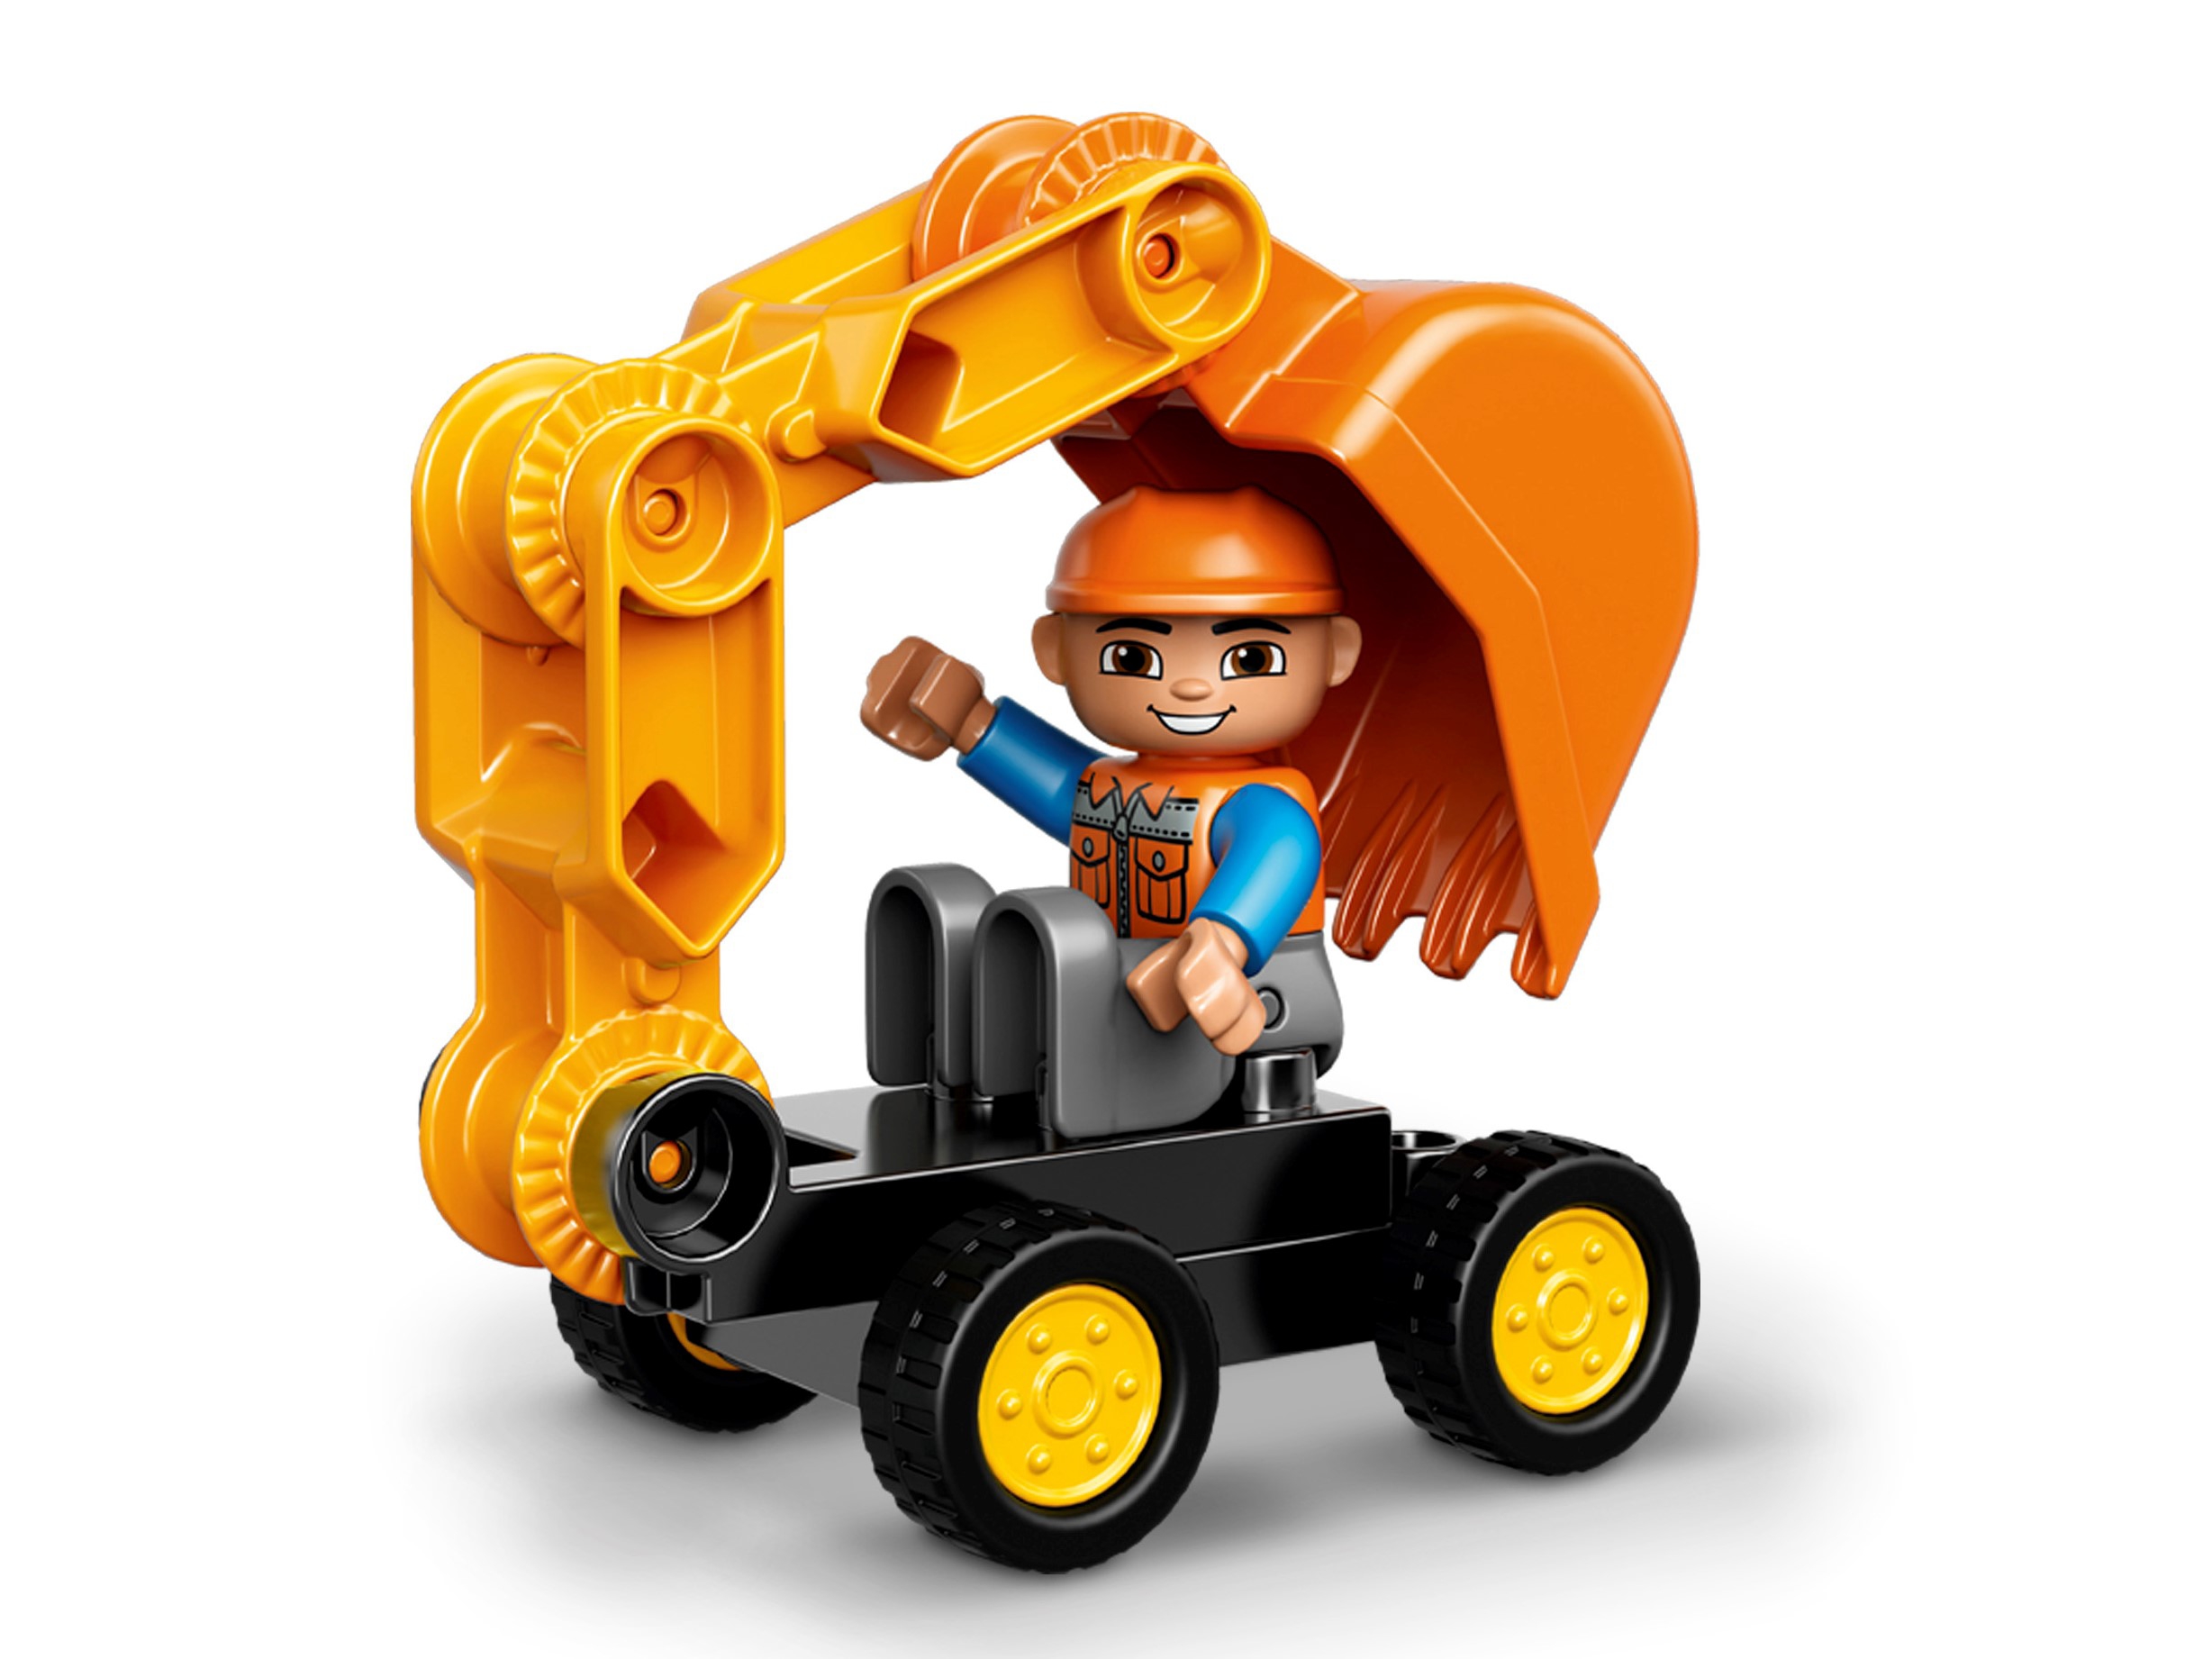 duplo truck and tracked excavator